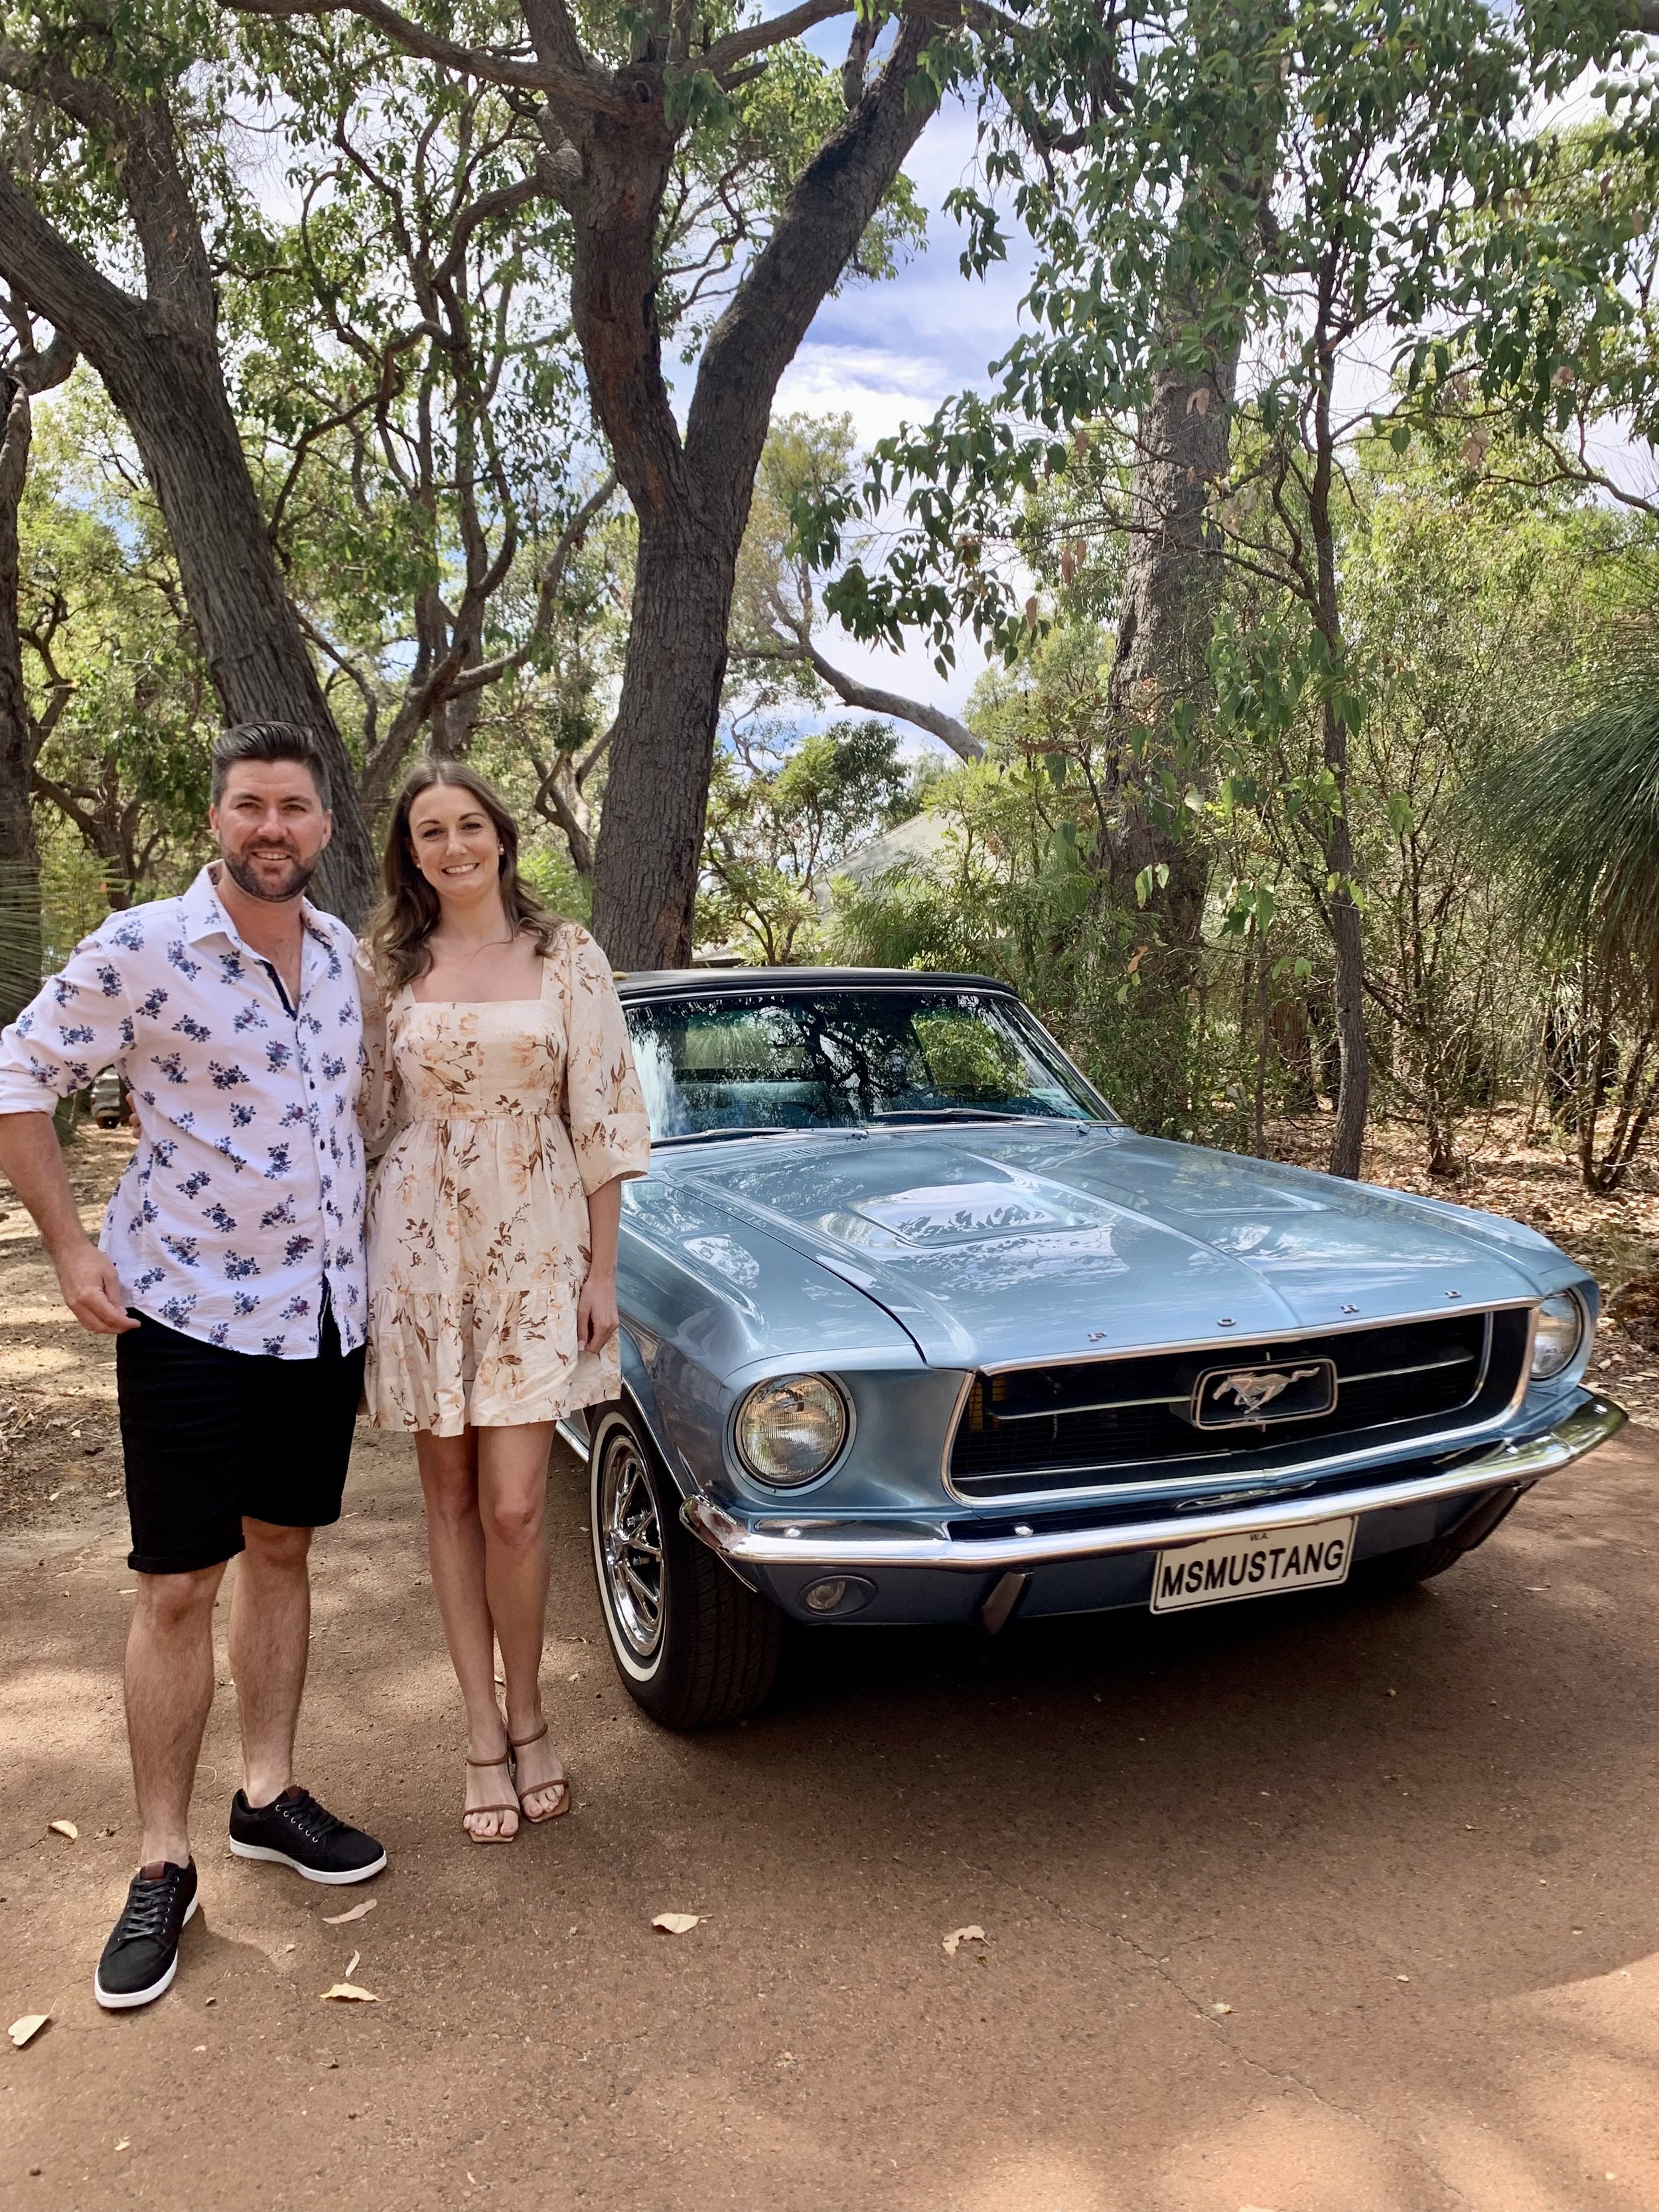 mr mustang hire-classic car-honeymoon-wedding-private driver-chauffeur-margaret river-south west.JPG